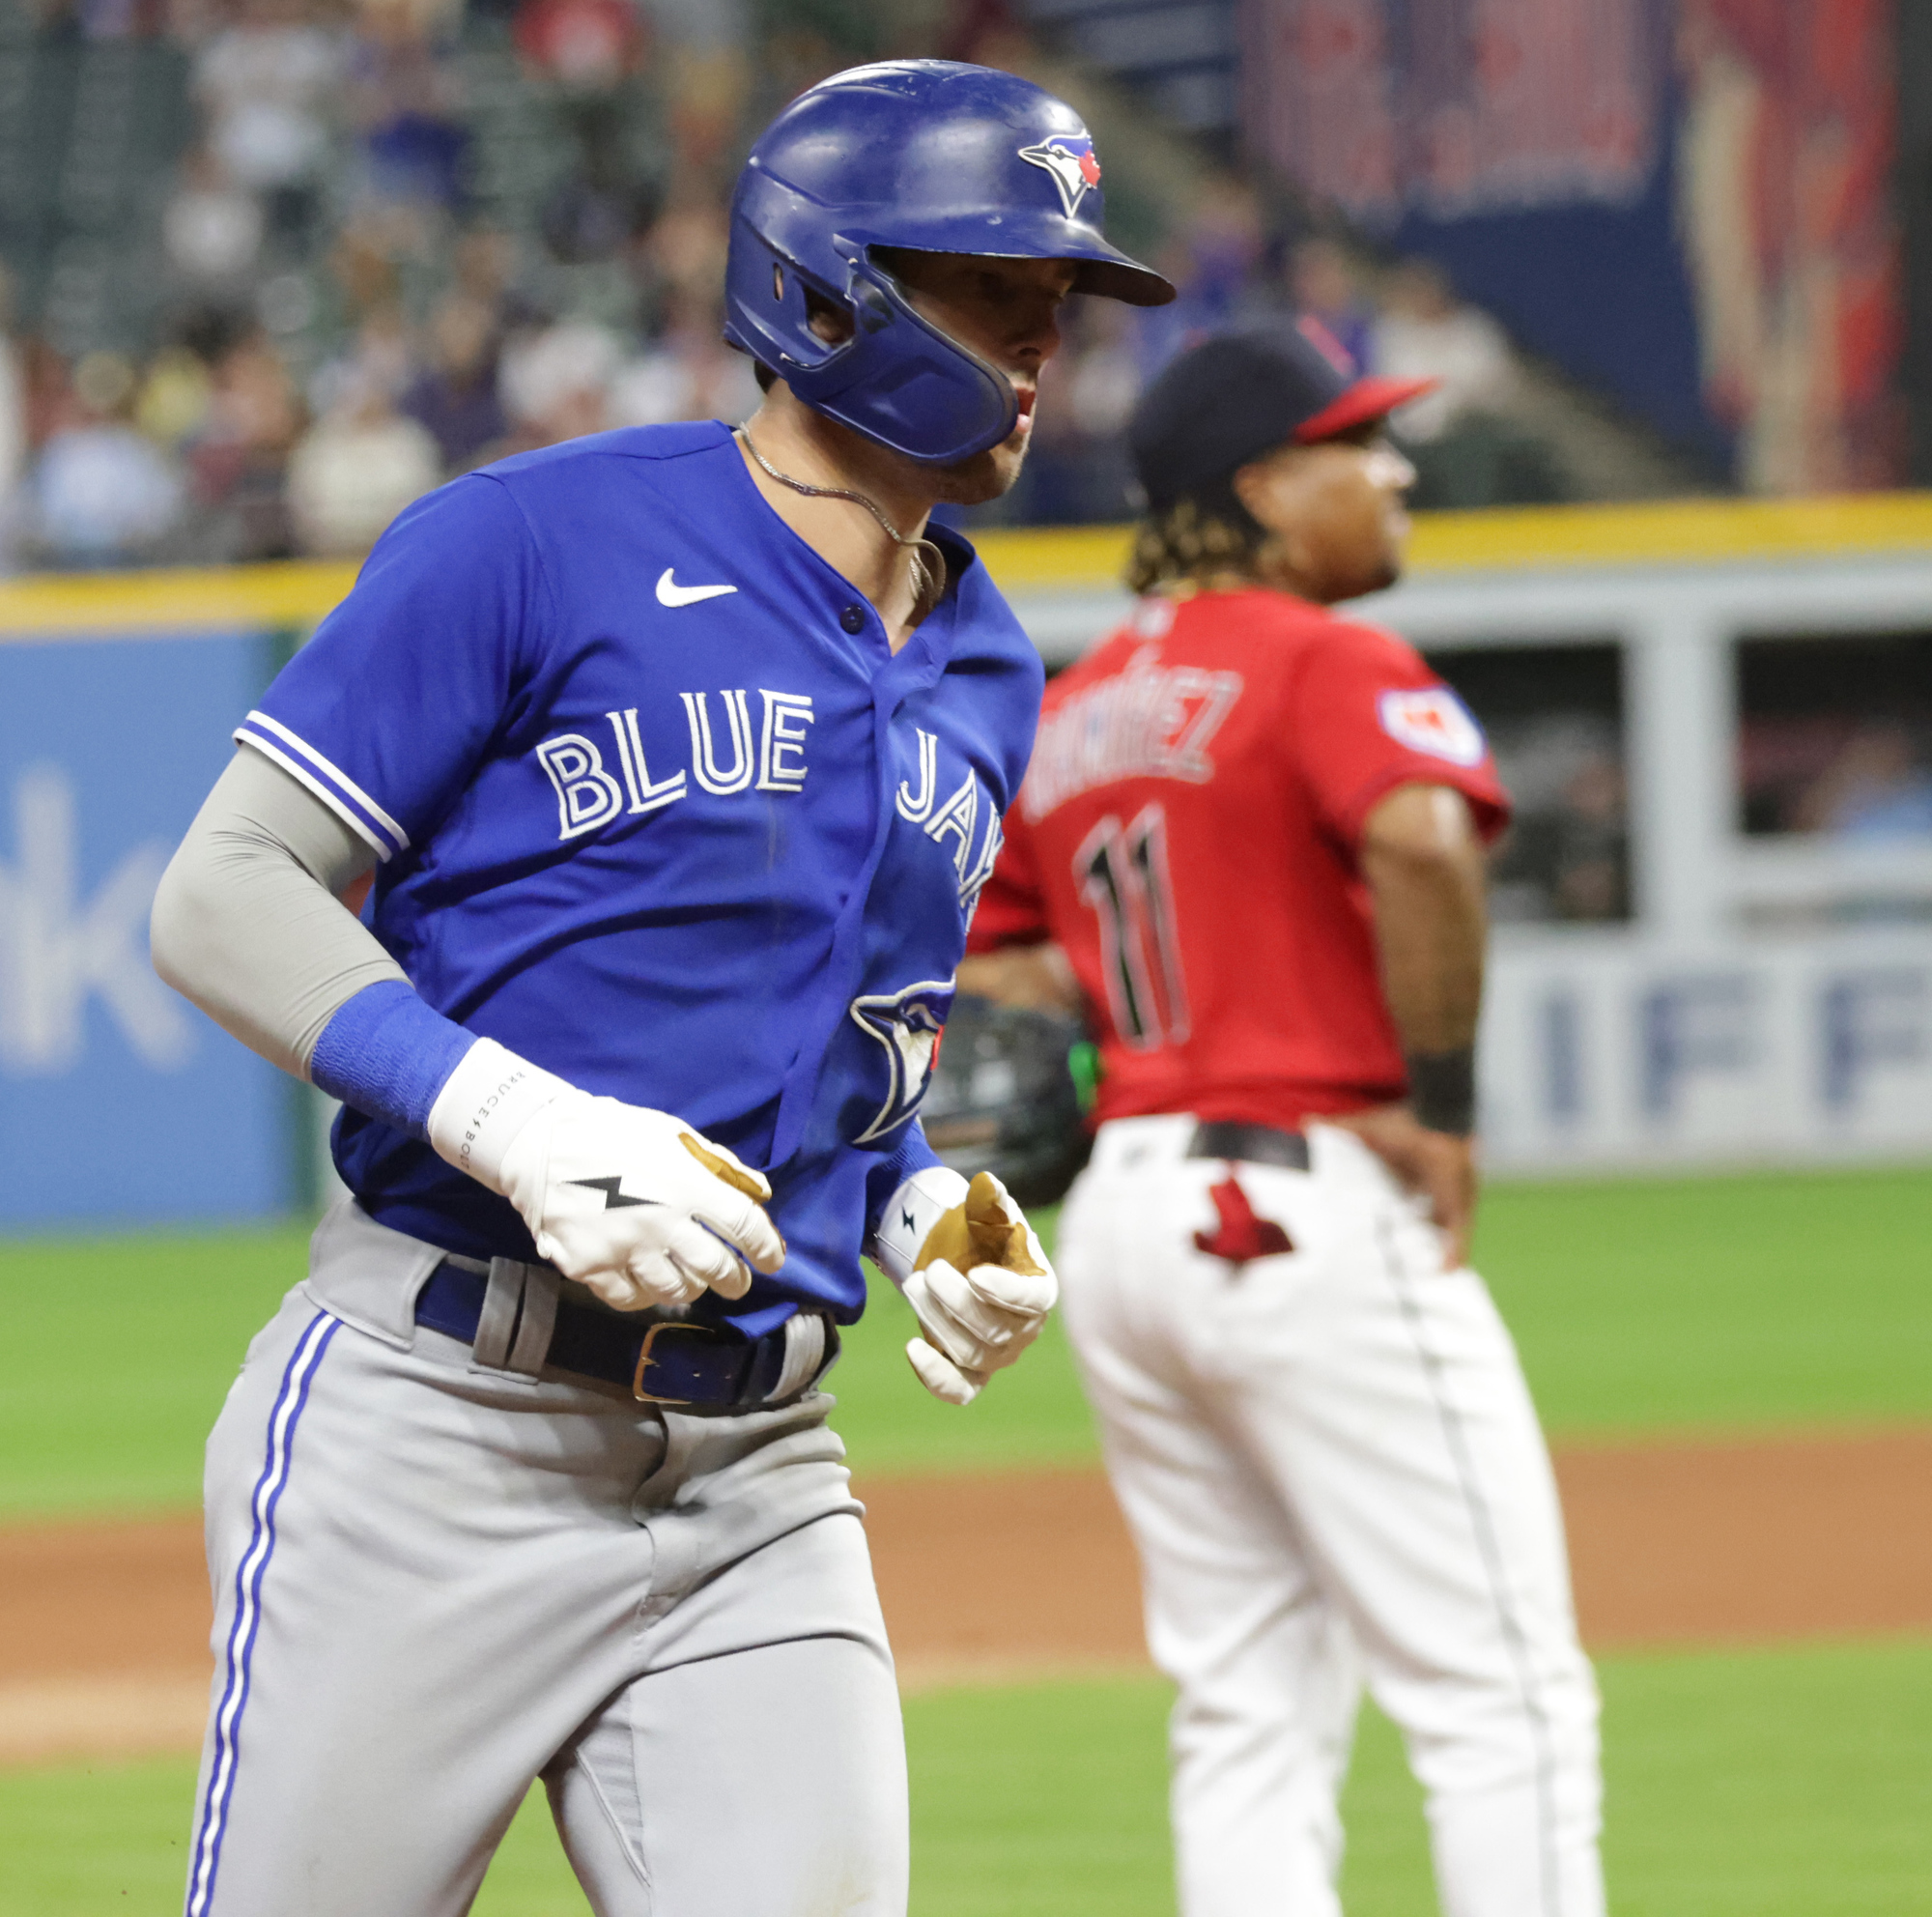 Biggio's homer sends Blue Jays to 3-1 win over Guardians after Ryu